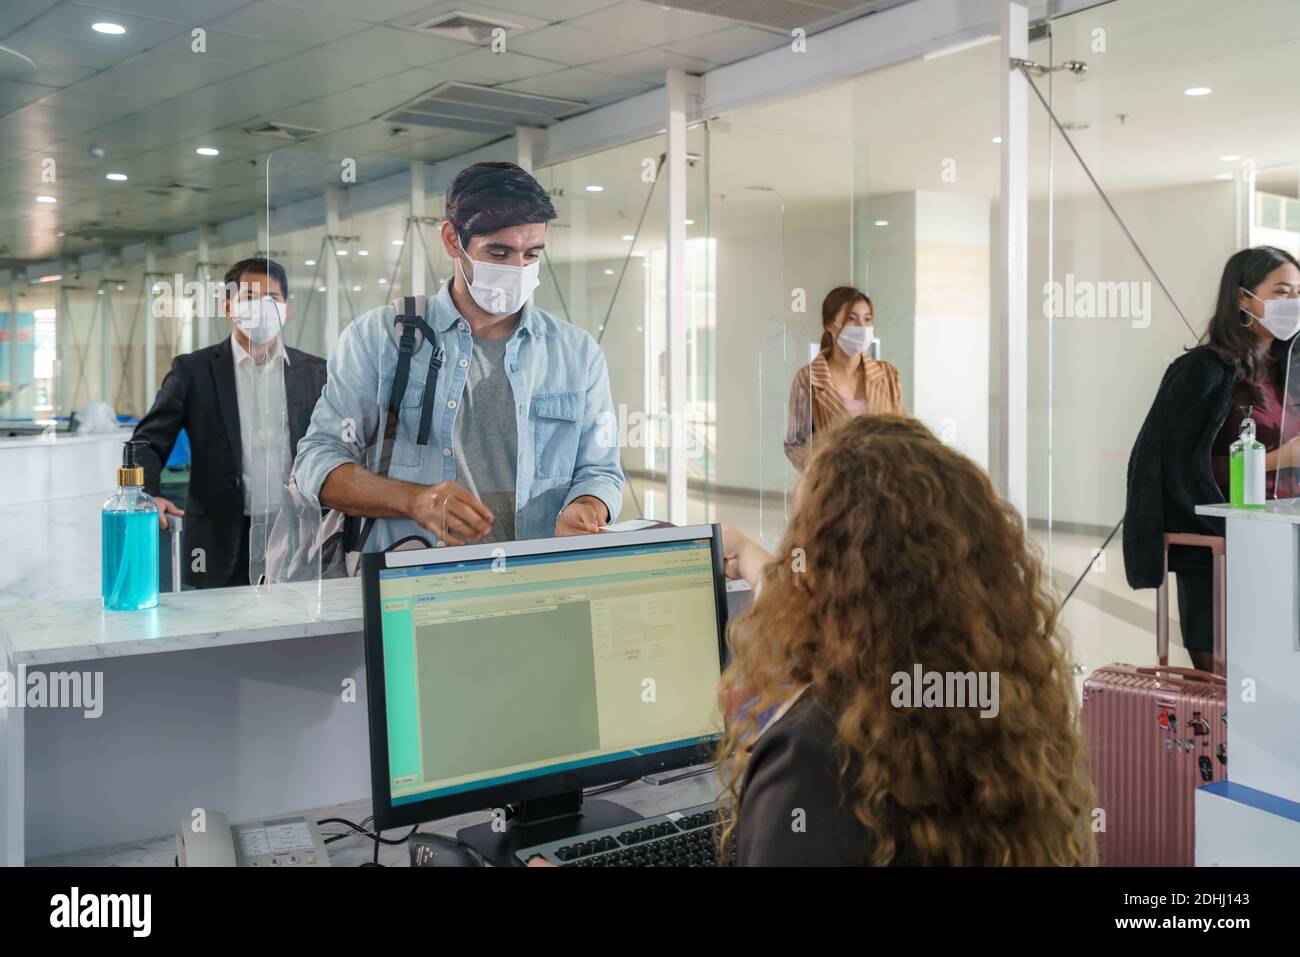 A male airline passengerwith mask is handing over his passport at the airline counter check in through an acrylic barrier for disease prevention coron Stock Photo